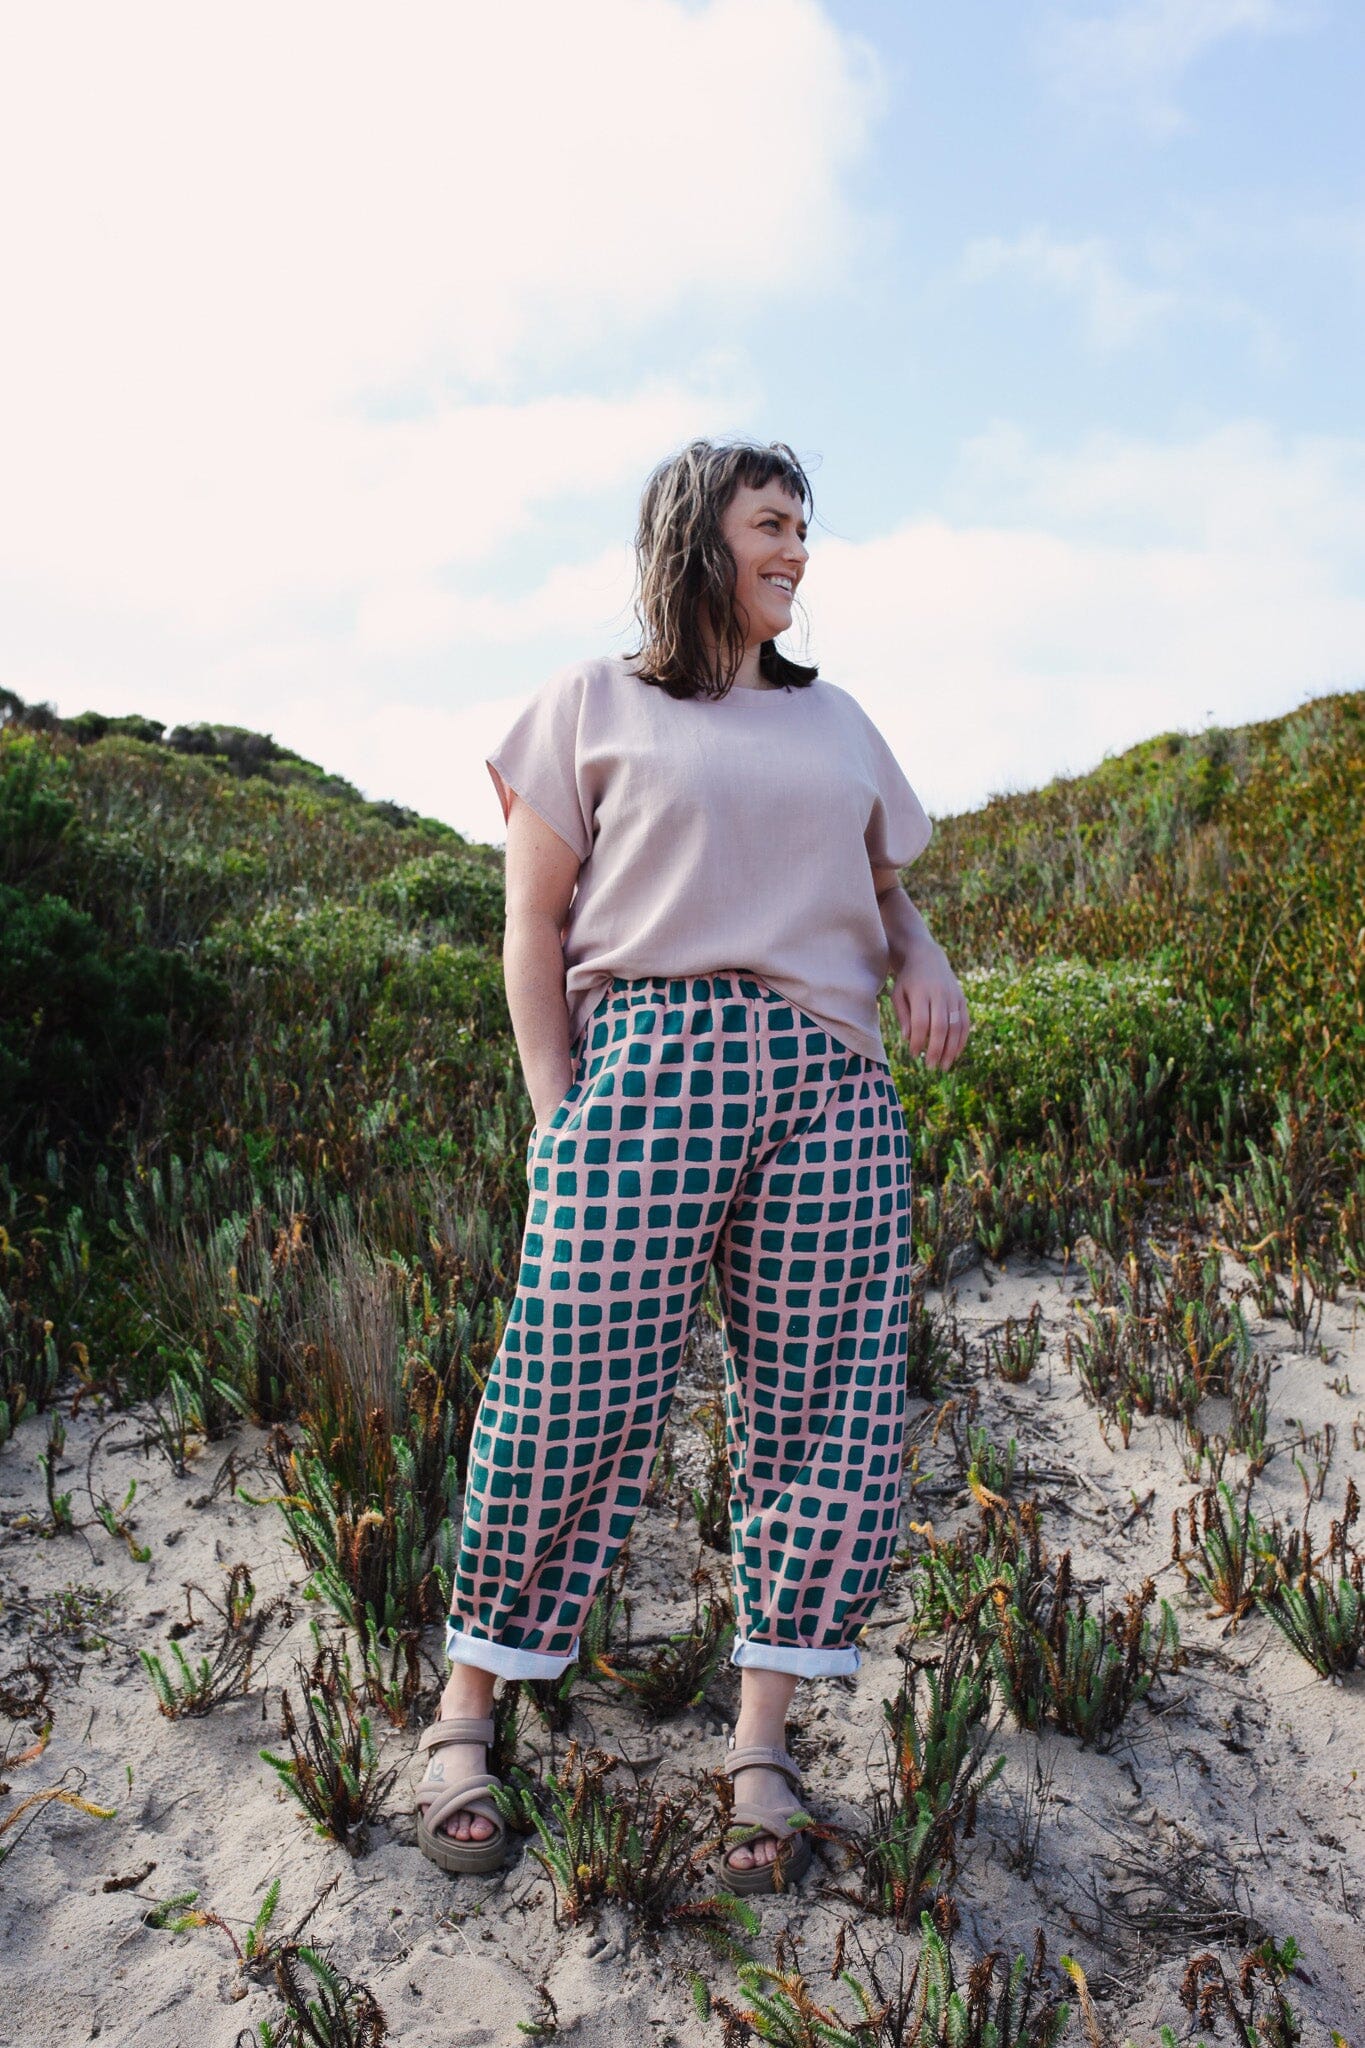 Washed Linen Shell Top - Rose Shirts & Tops The Spotted Quoll 